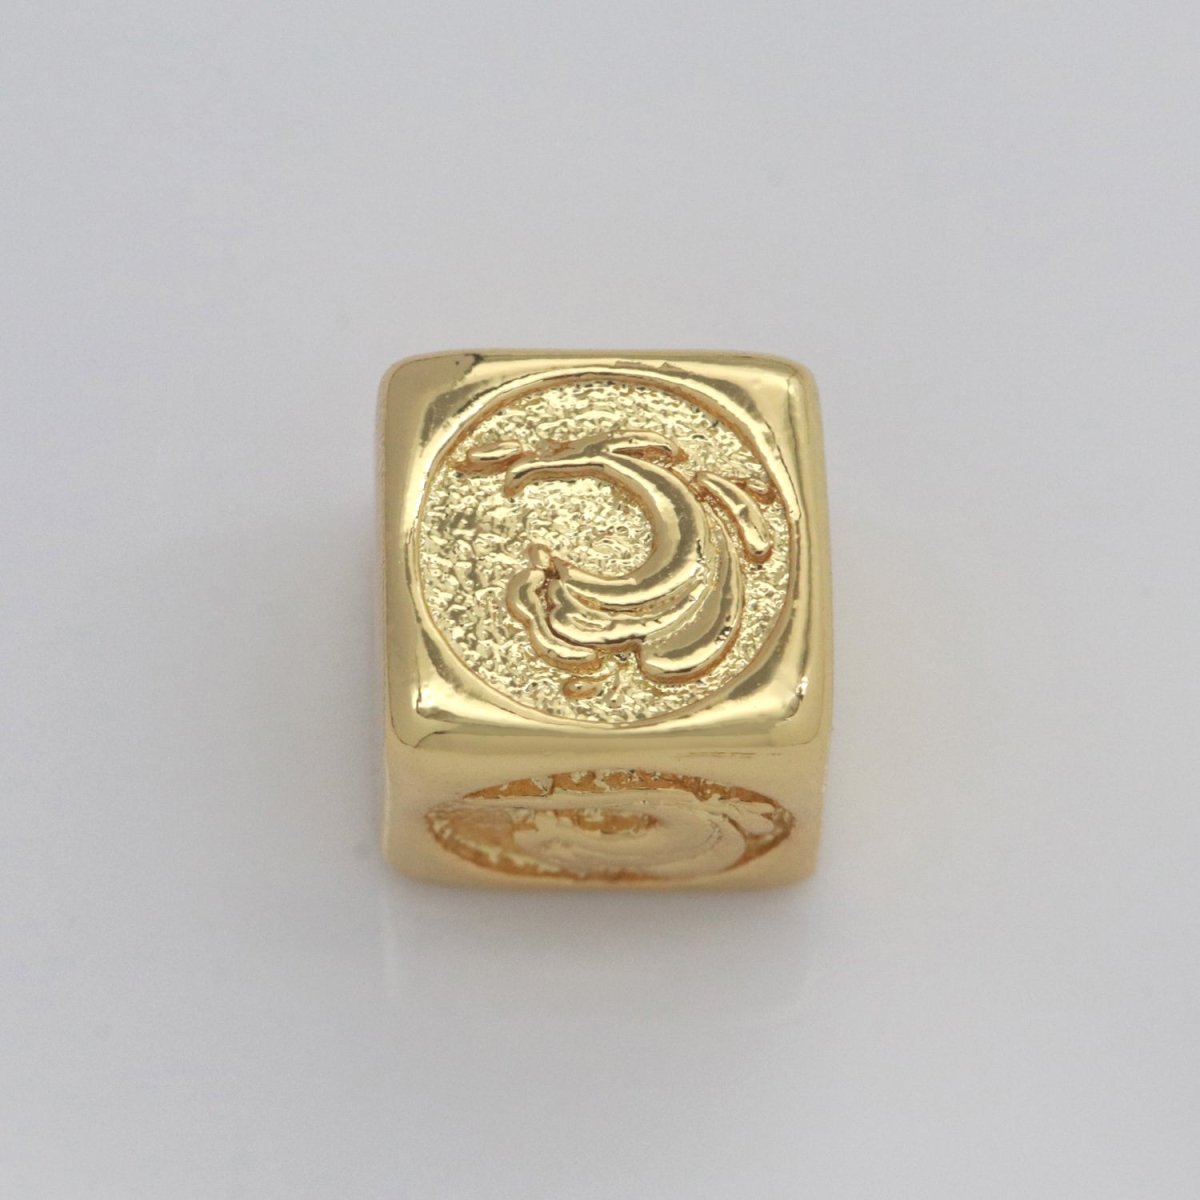 Element Bead Collection Gold Element Charm Fire Wind Earth Ocean Wave Bead Spacer 14K Gold Filled Cube Beads for Bracelet Supply B-637 to B-640 - DLUXCA